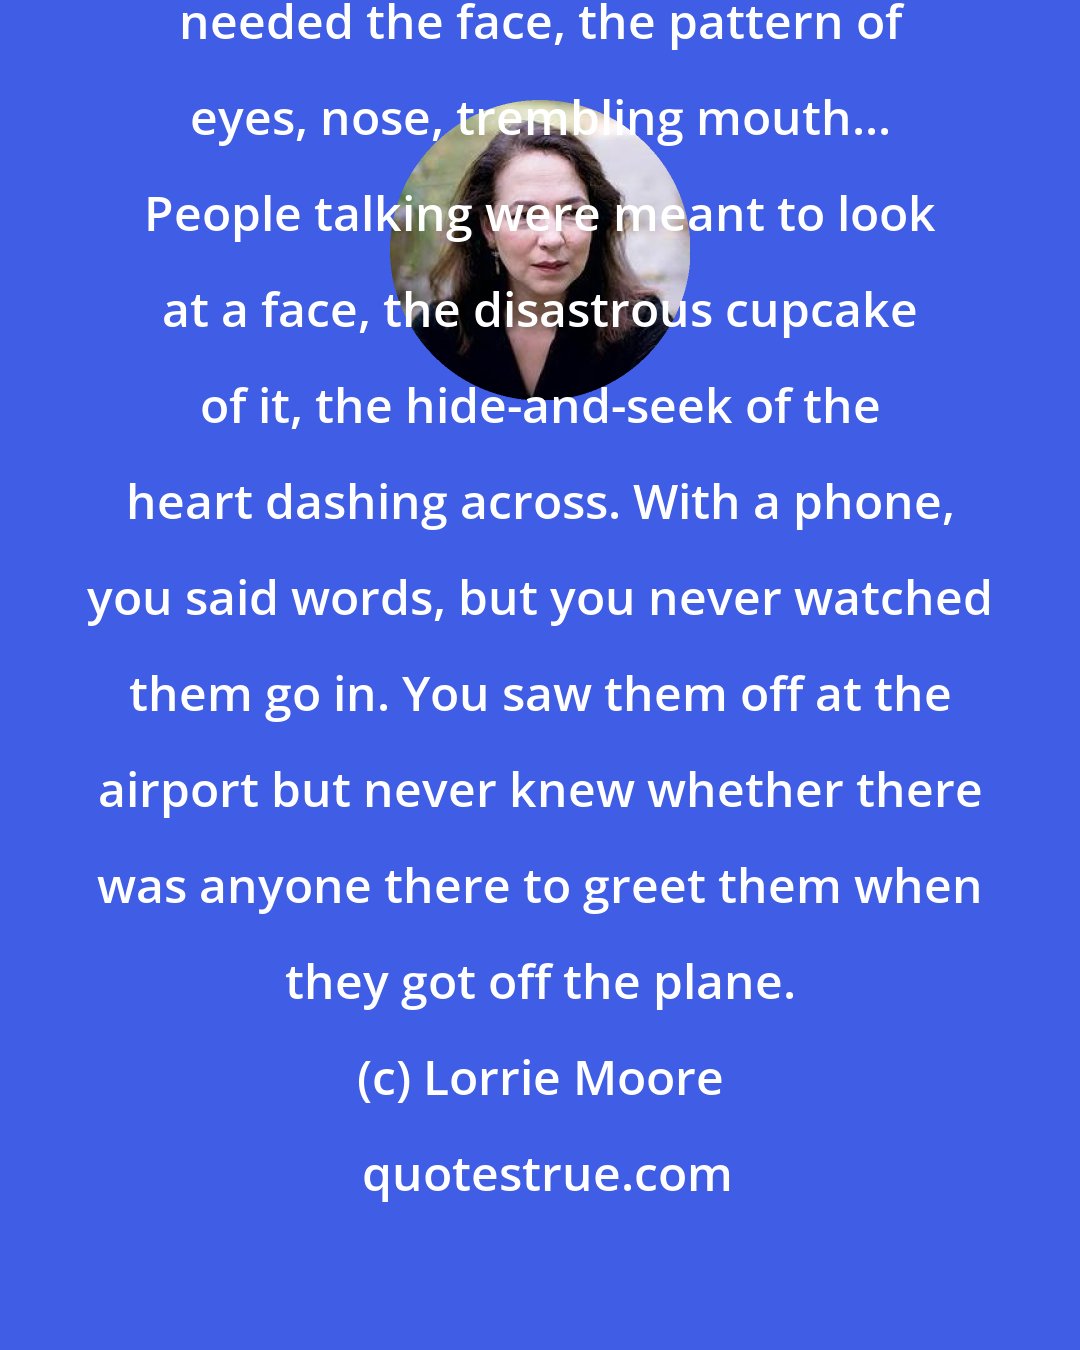 Lorrie Moore: She was not good on the phone. She needed the face, the pattern of eyes, nose, trembling mouth... People talking were meant to look at a face, the disastrous cupcake of it, the hide-and-seek of the heart dashing across. With a phone, you said words, but you never watched them go in. You saw them off at the airport but never knew whether there was anyone there to greet them when they got off the plane.